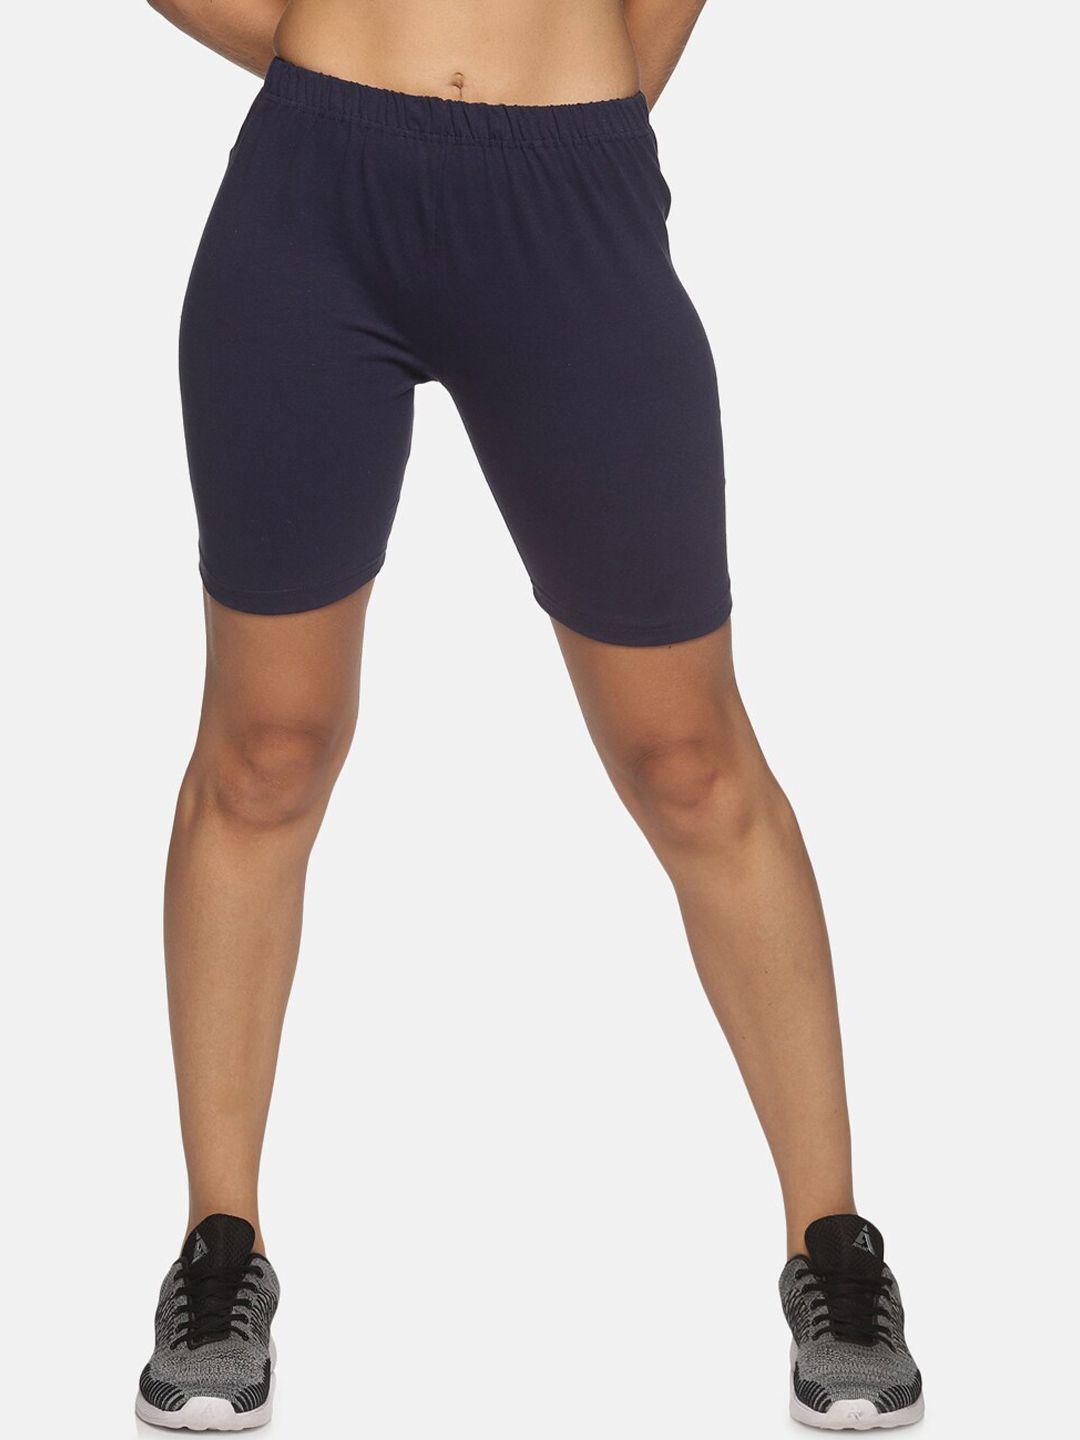 not-yet-by-us-women-navy-blue-slim-fit-outdoor-sports-shorts